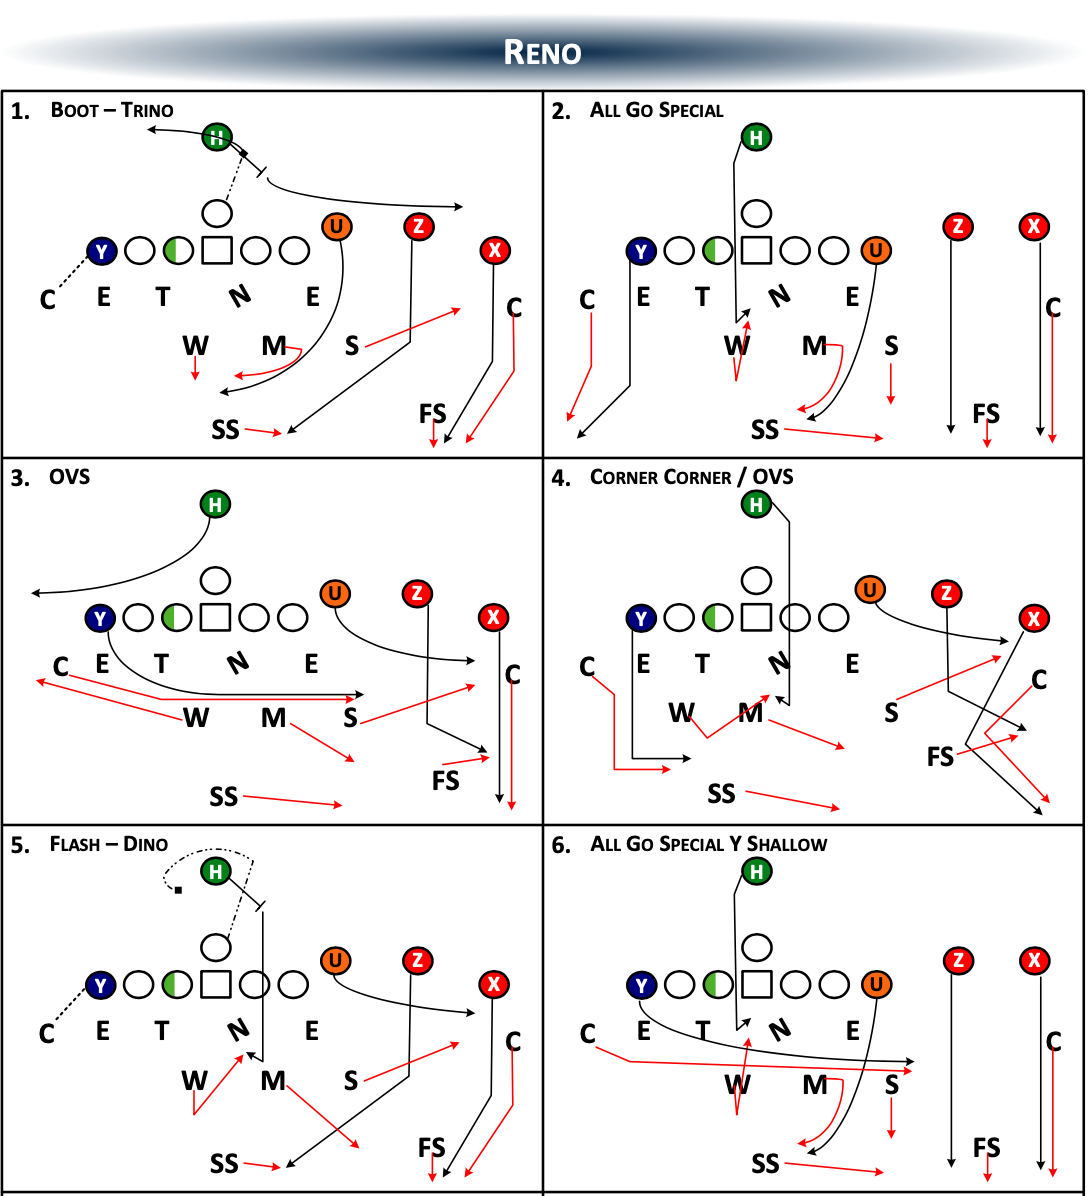 Reno matched to different route combinations